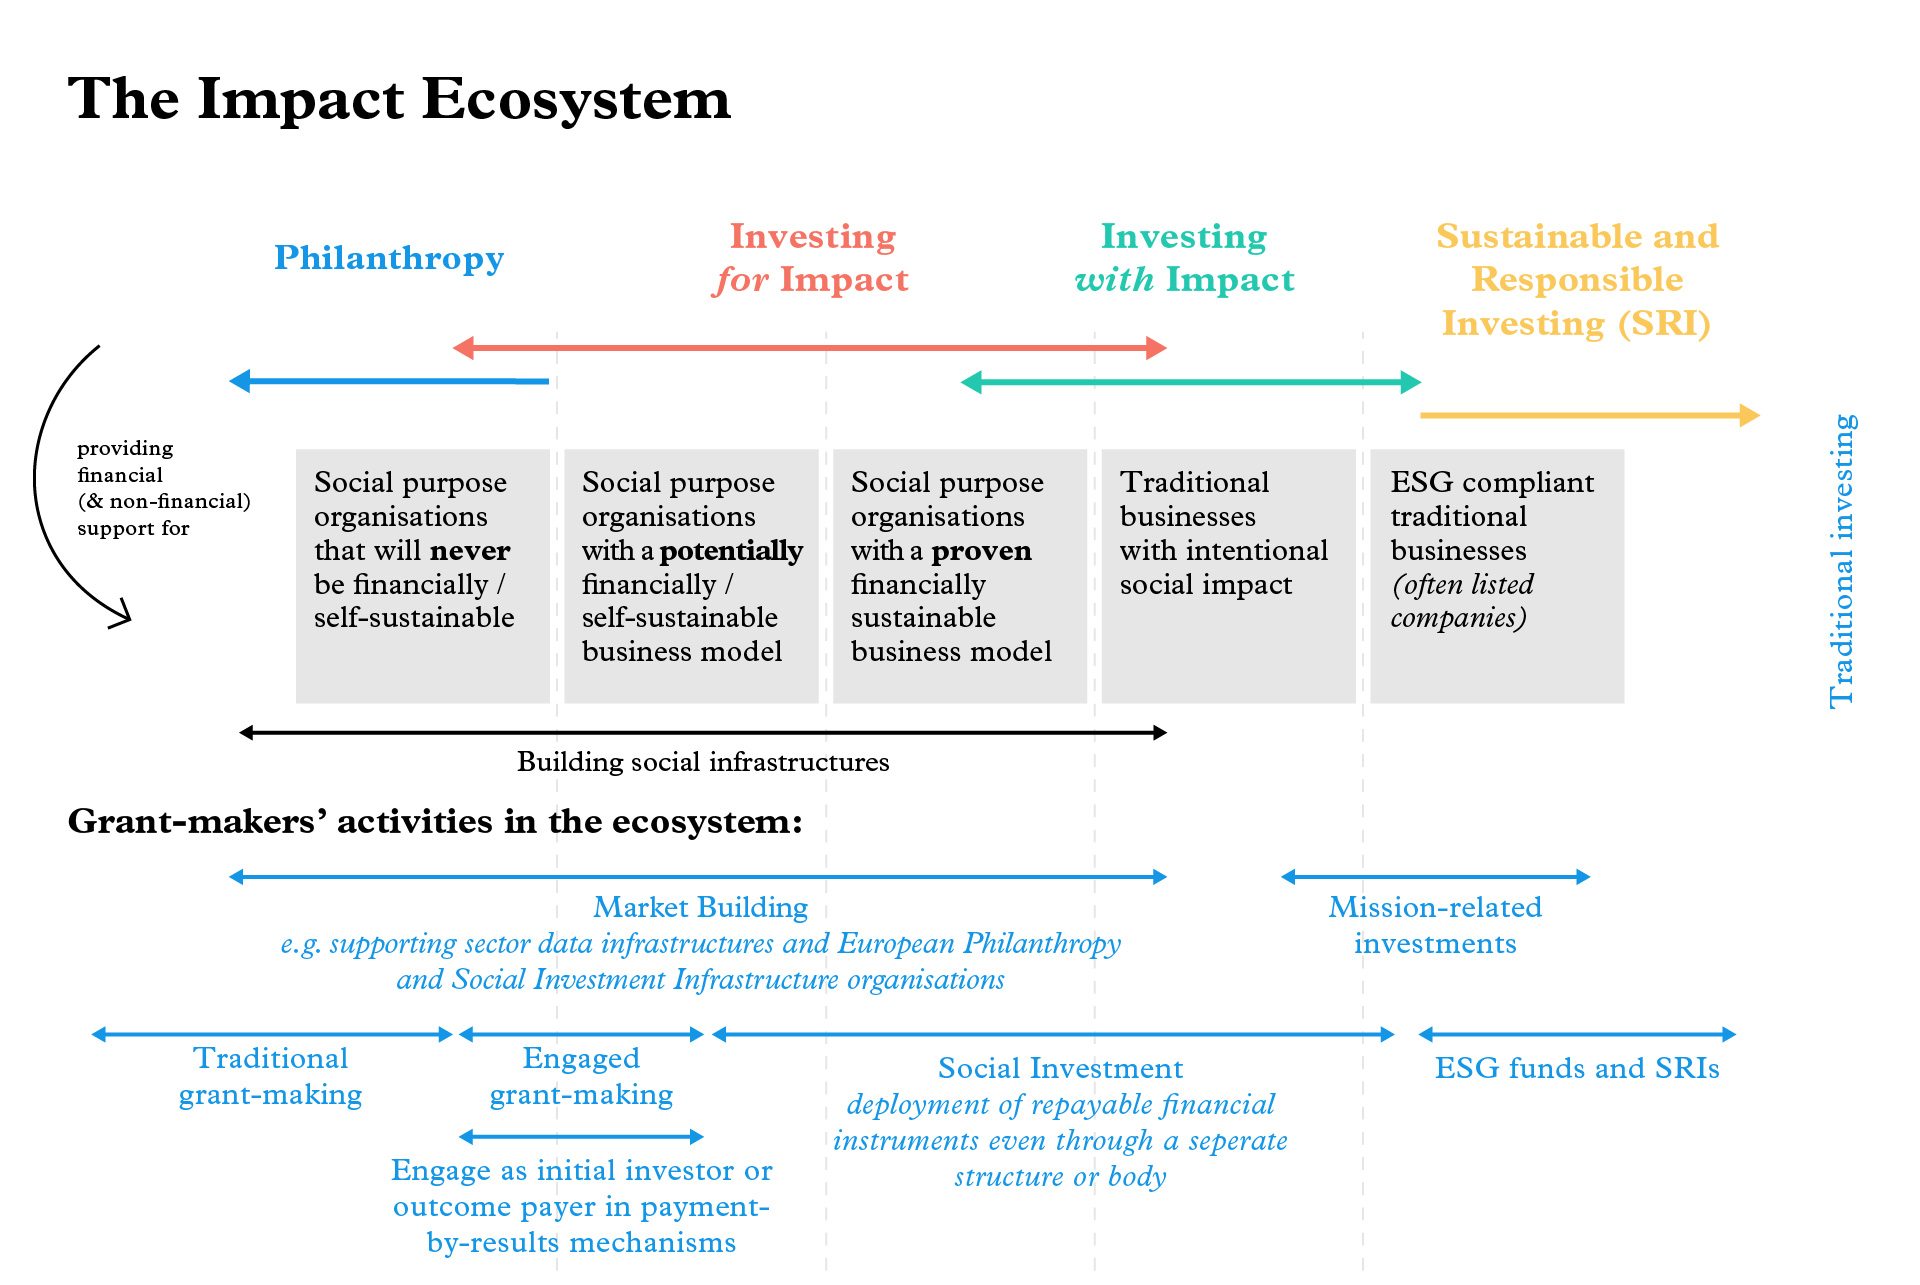 Foundations in the Impact Ecosystem